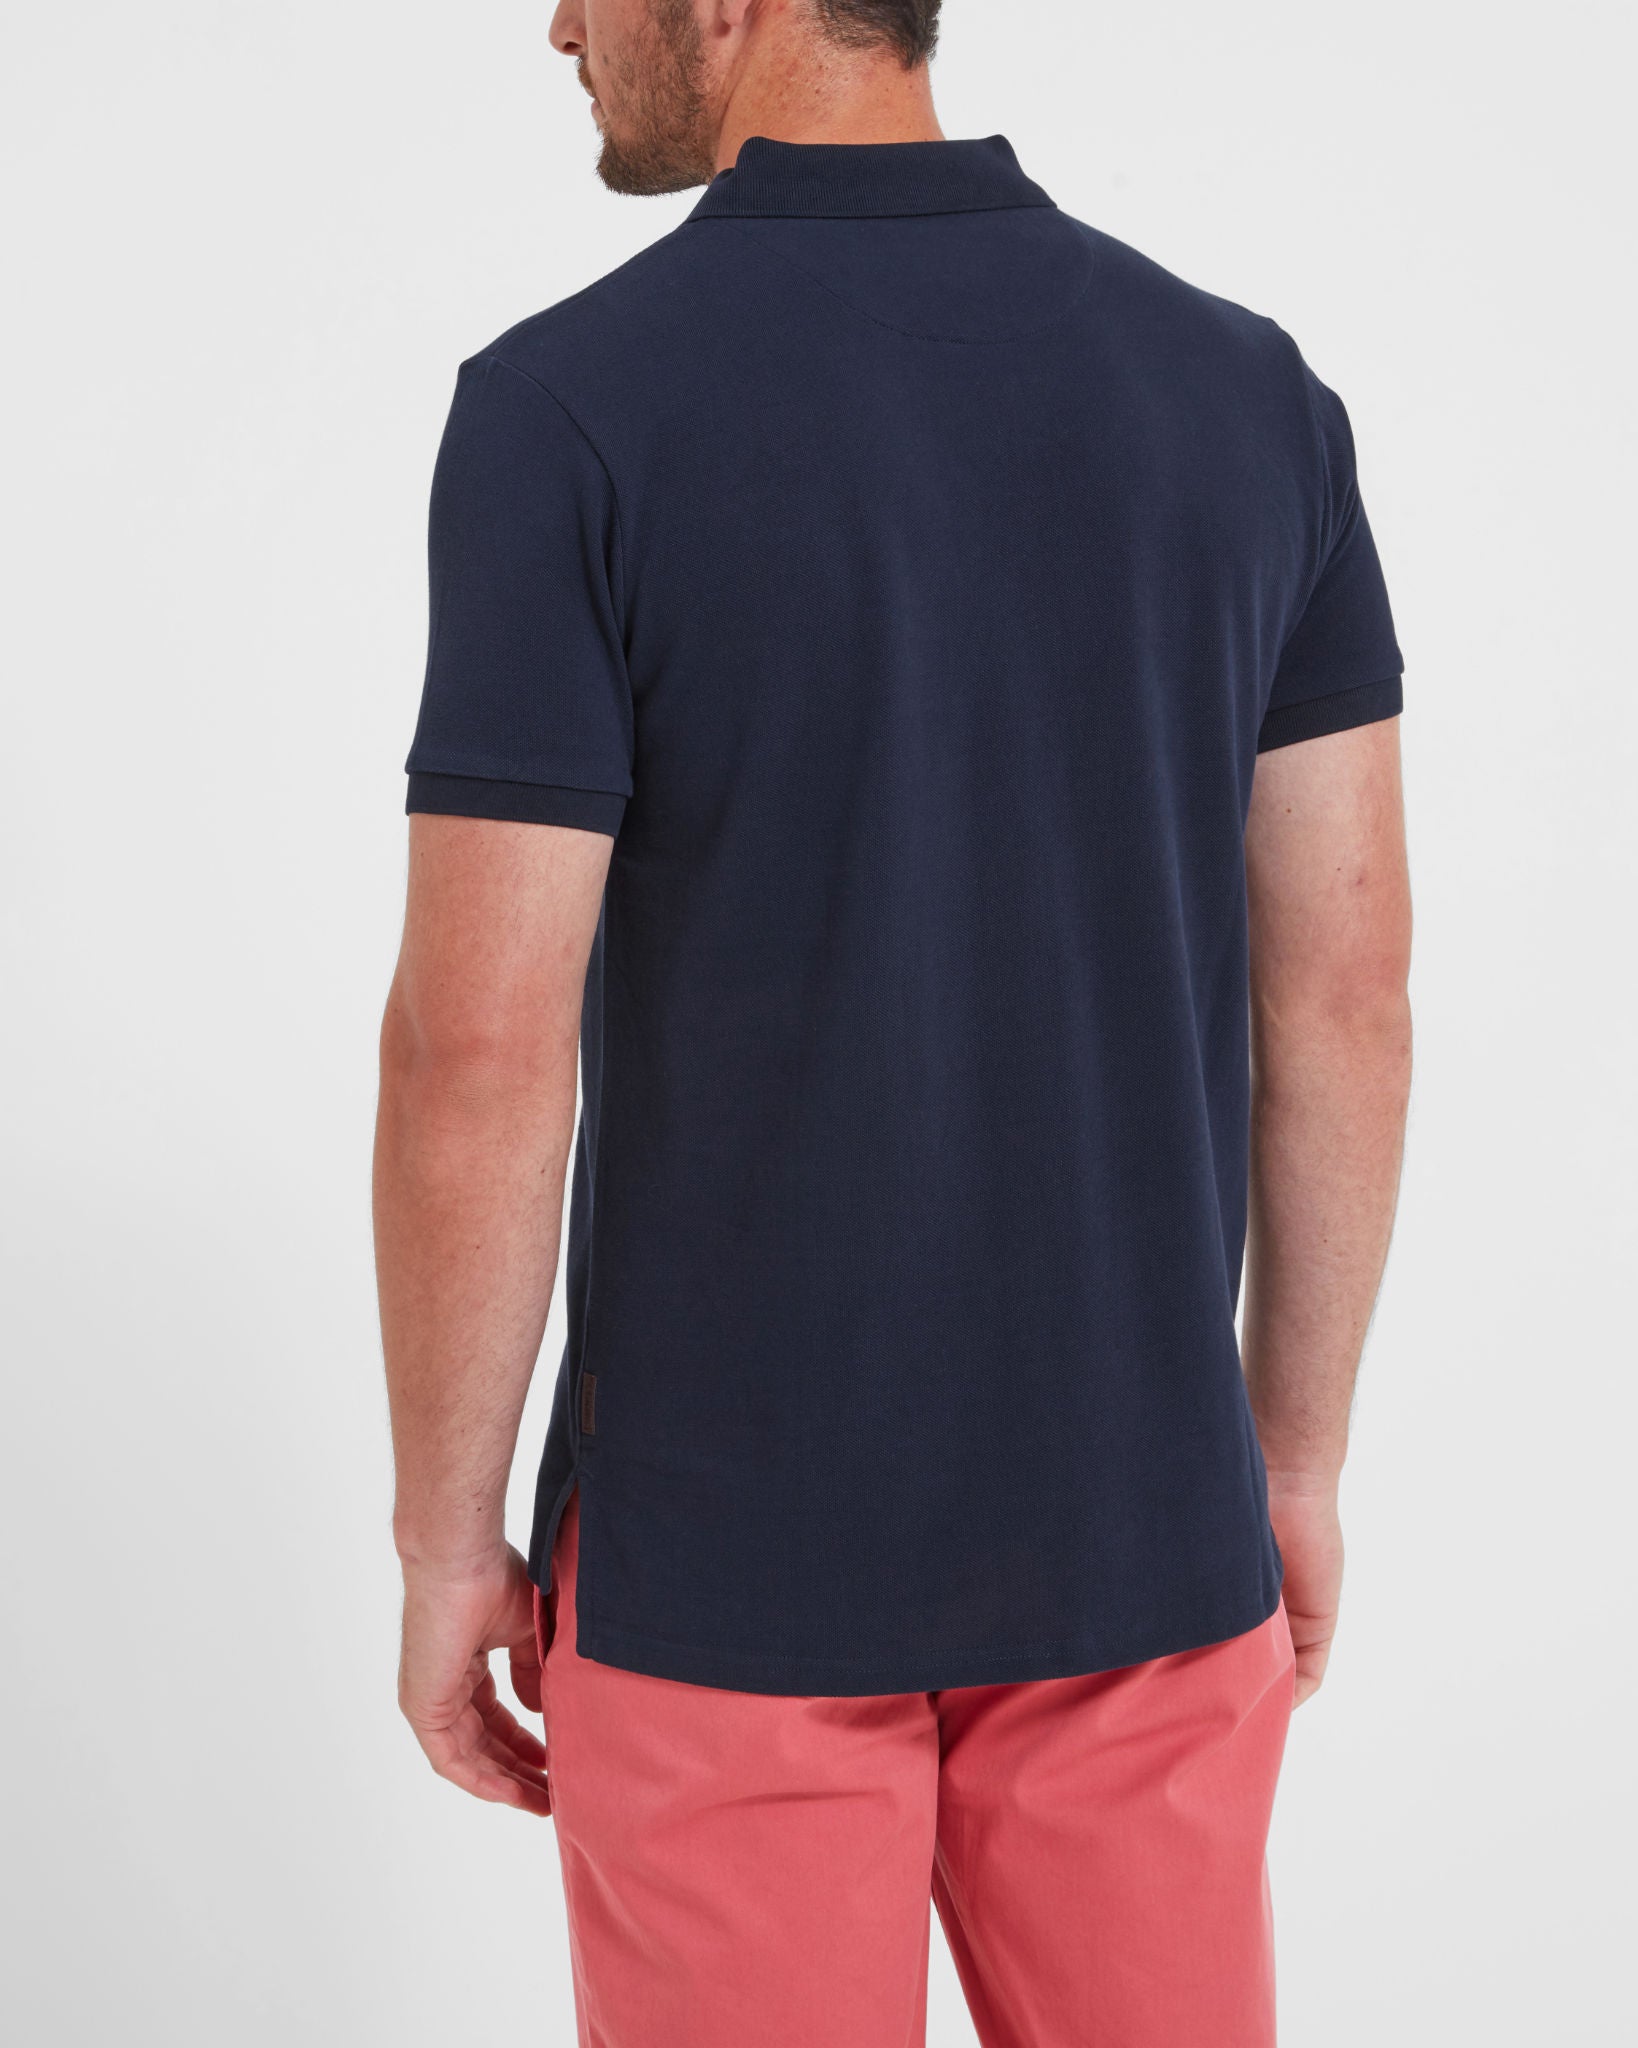 St Ives Tailored Polo - Navy